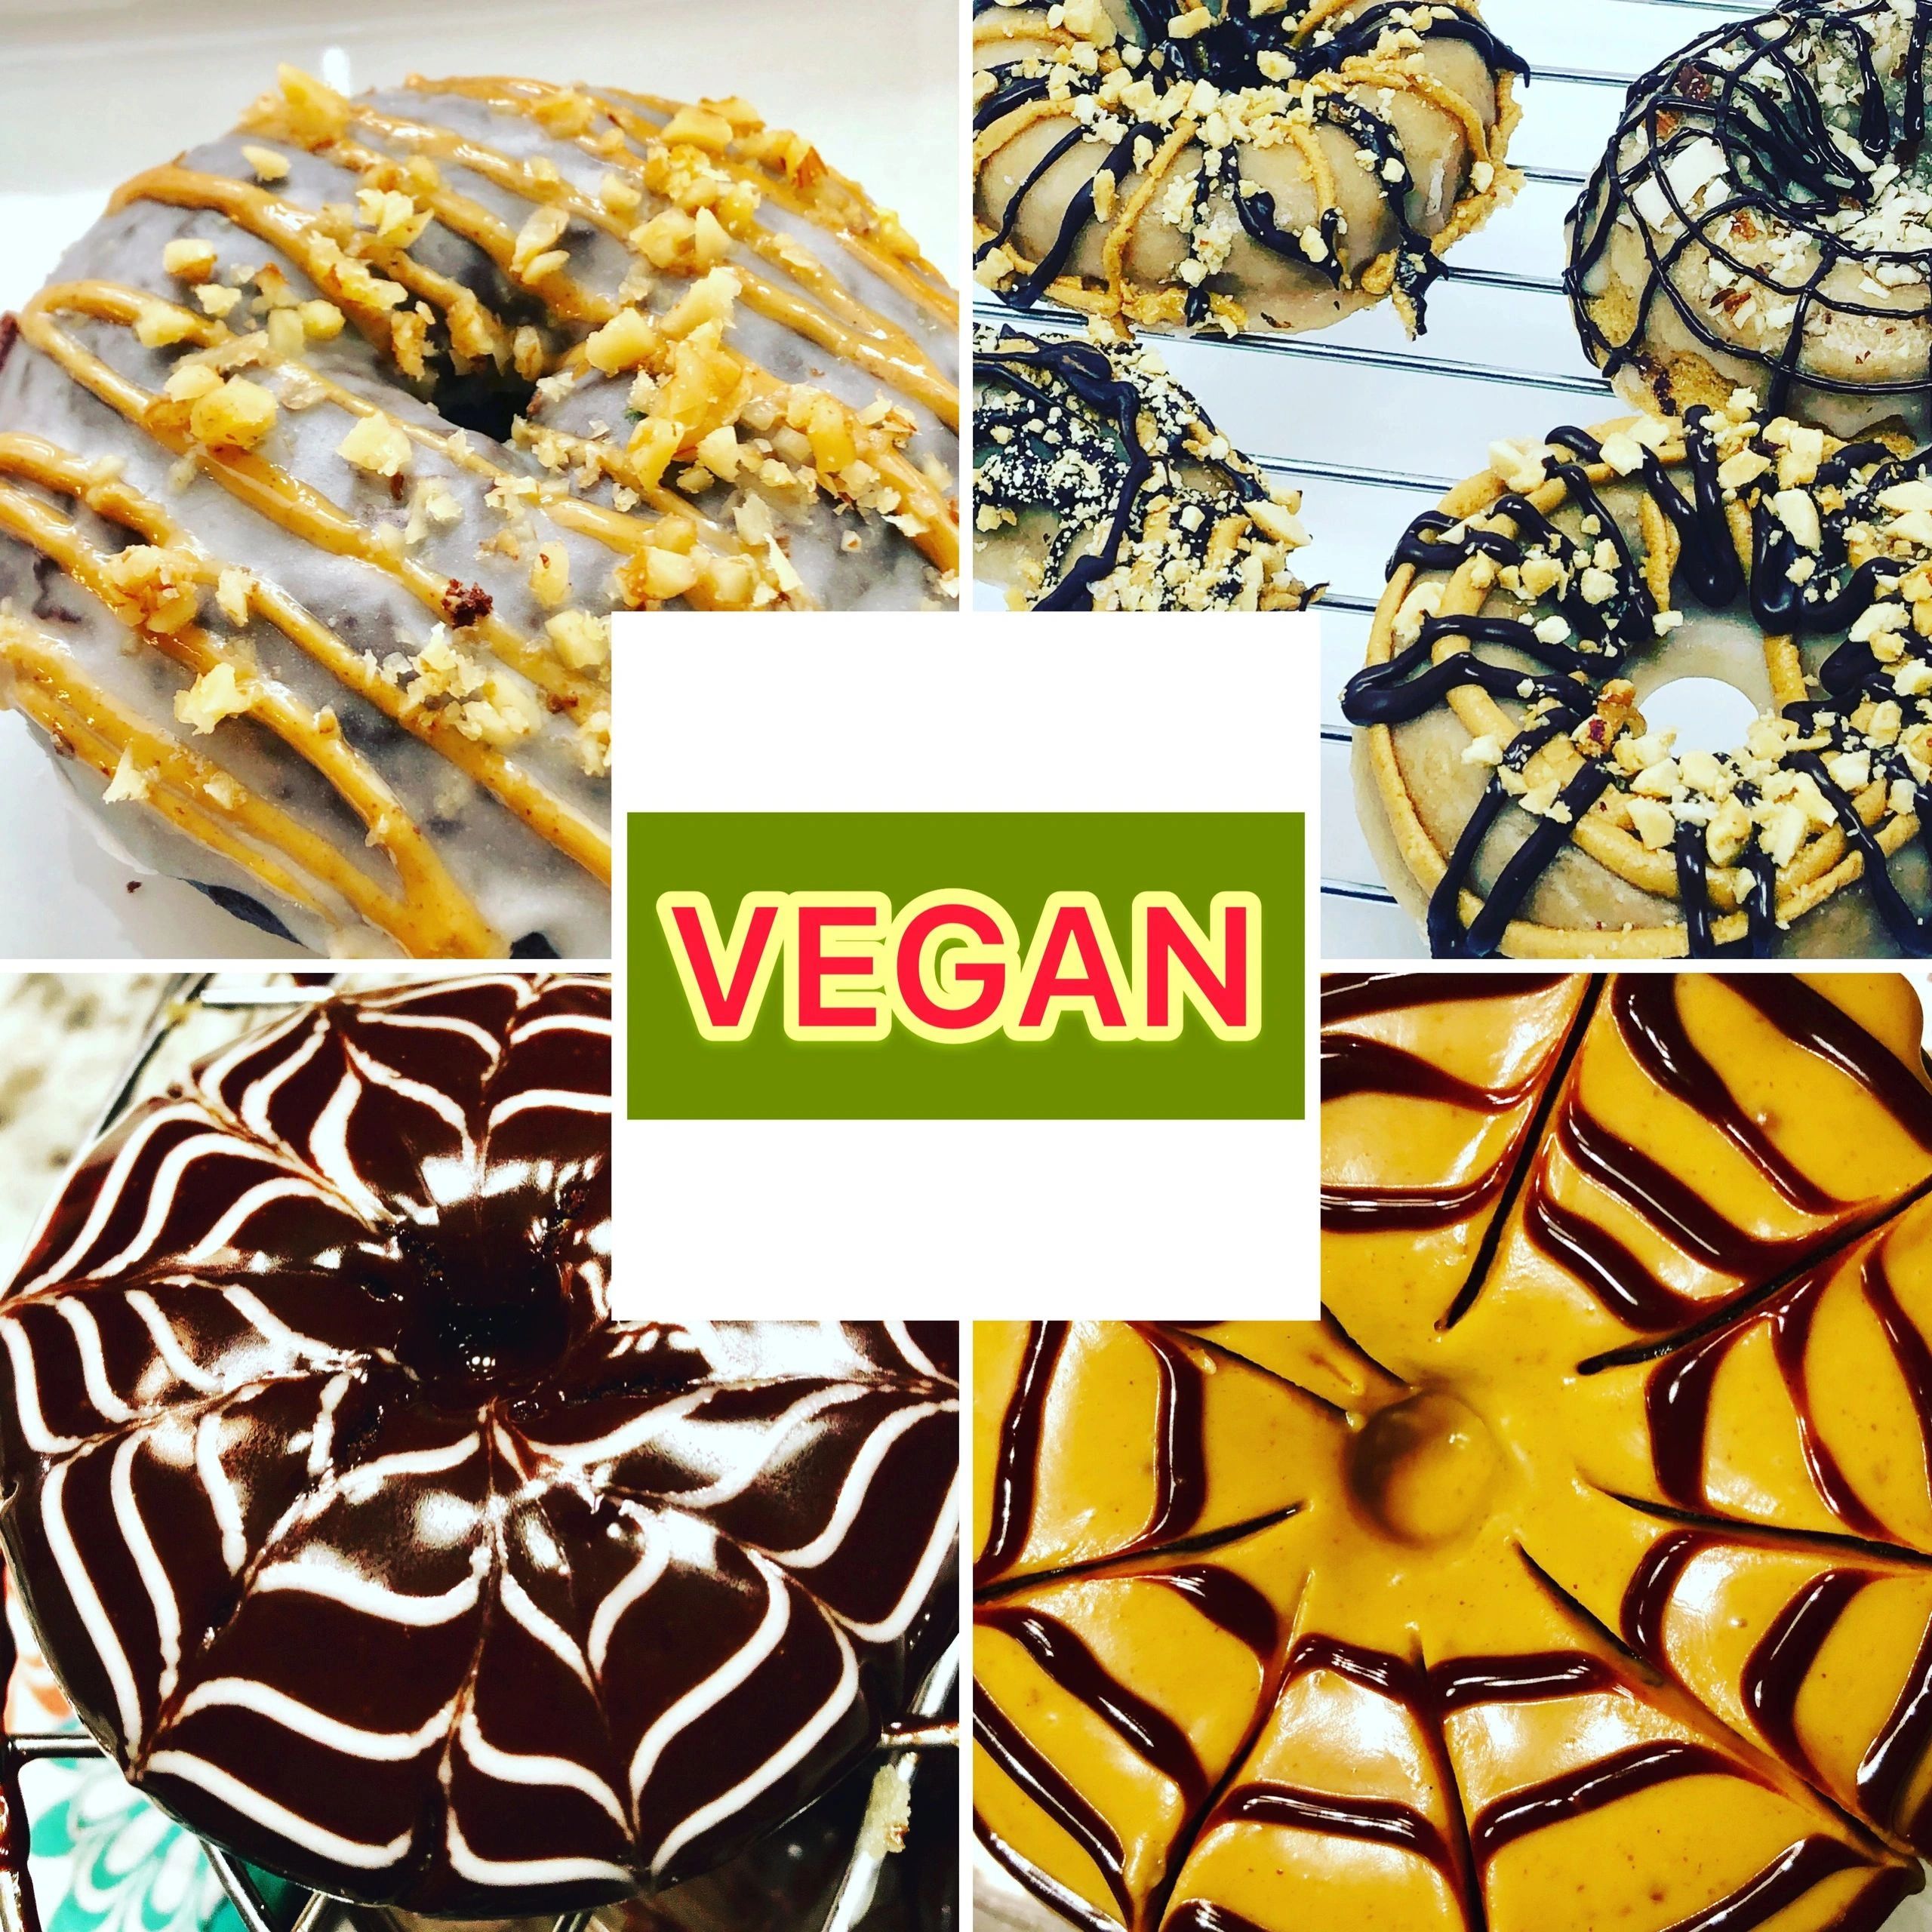 All Vegan Donuts, Muffins, Cakes and plenty more Food For Life Goodies!!